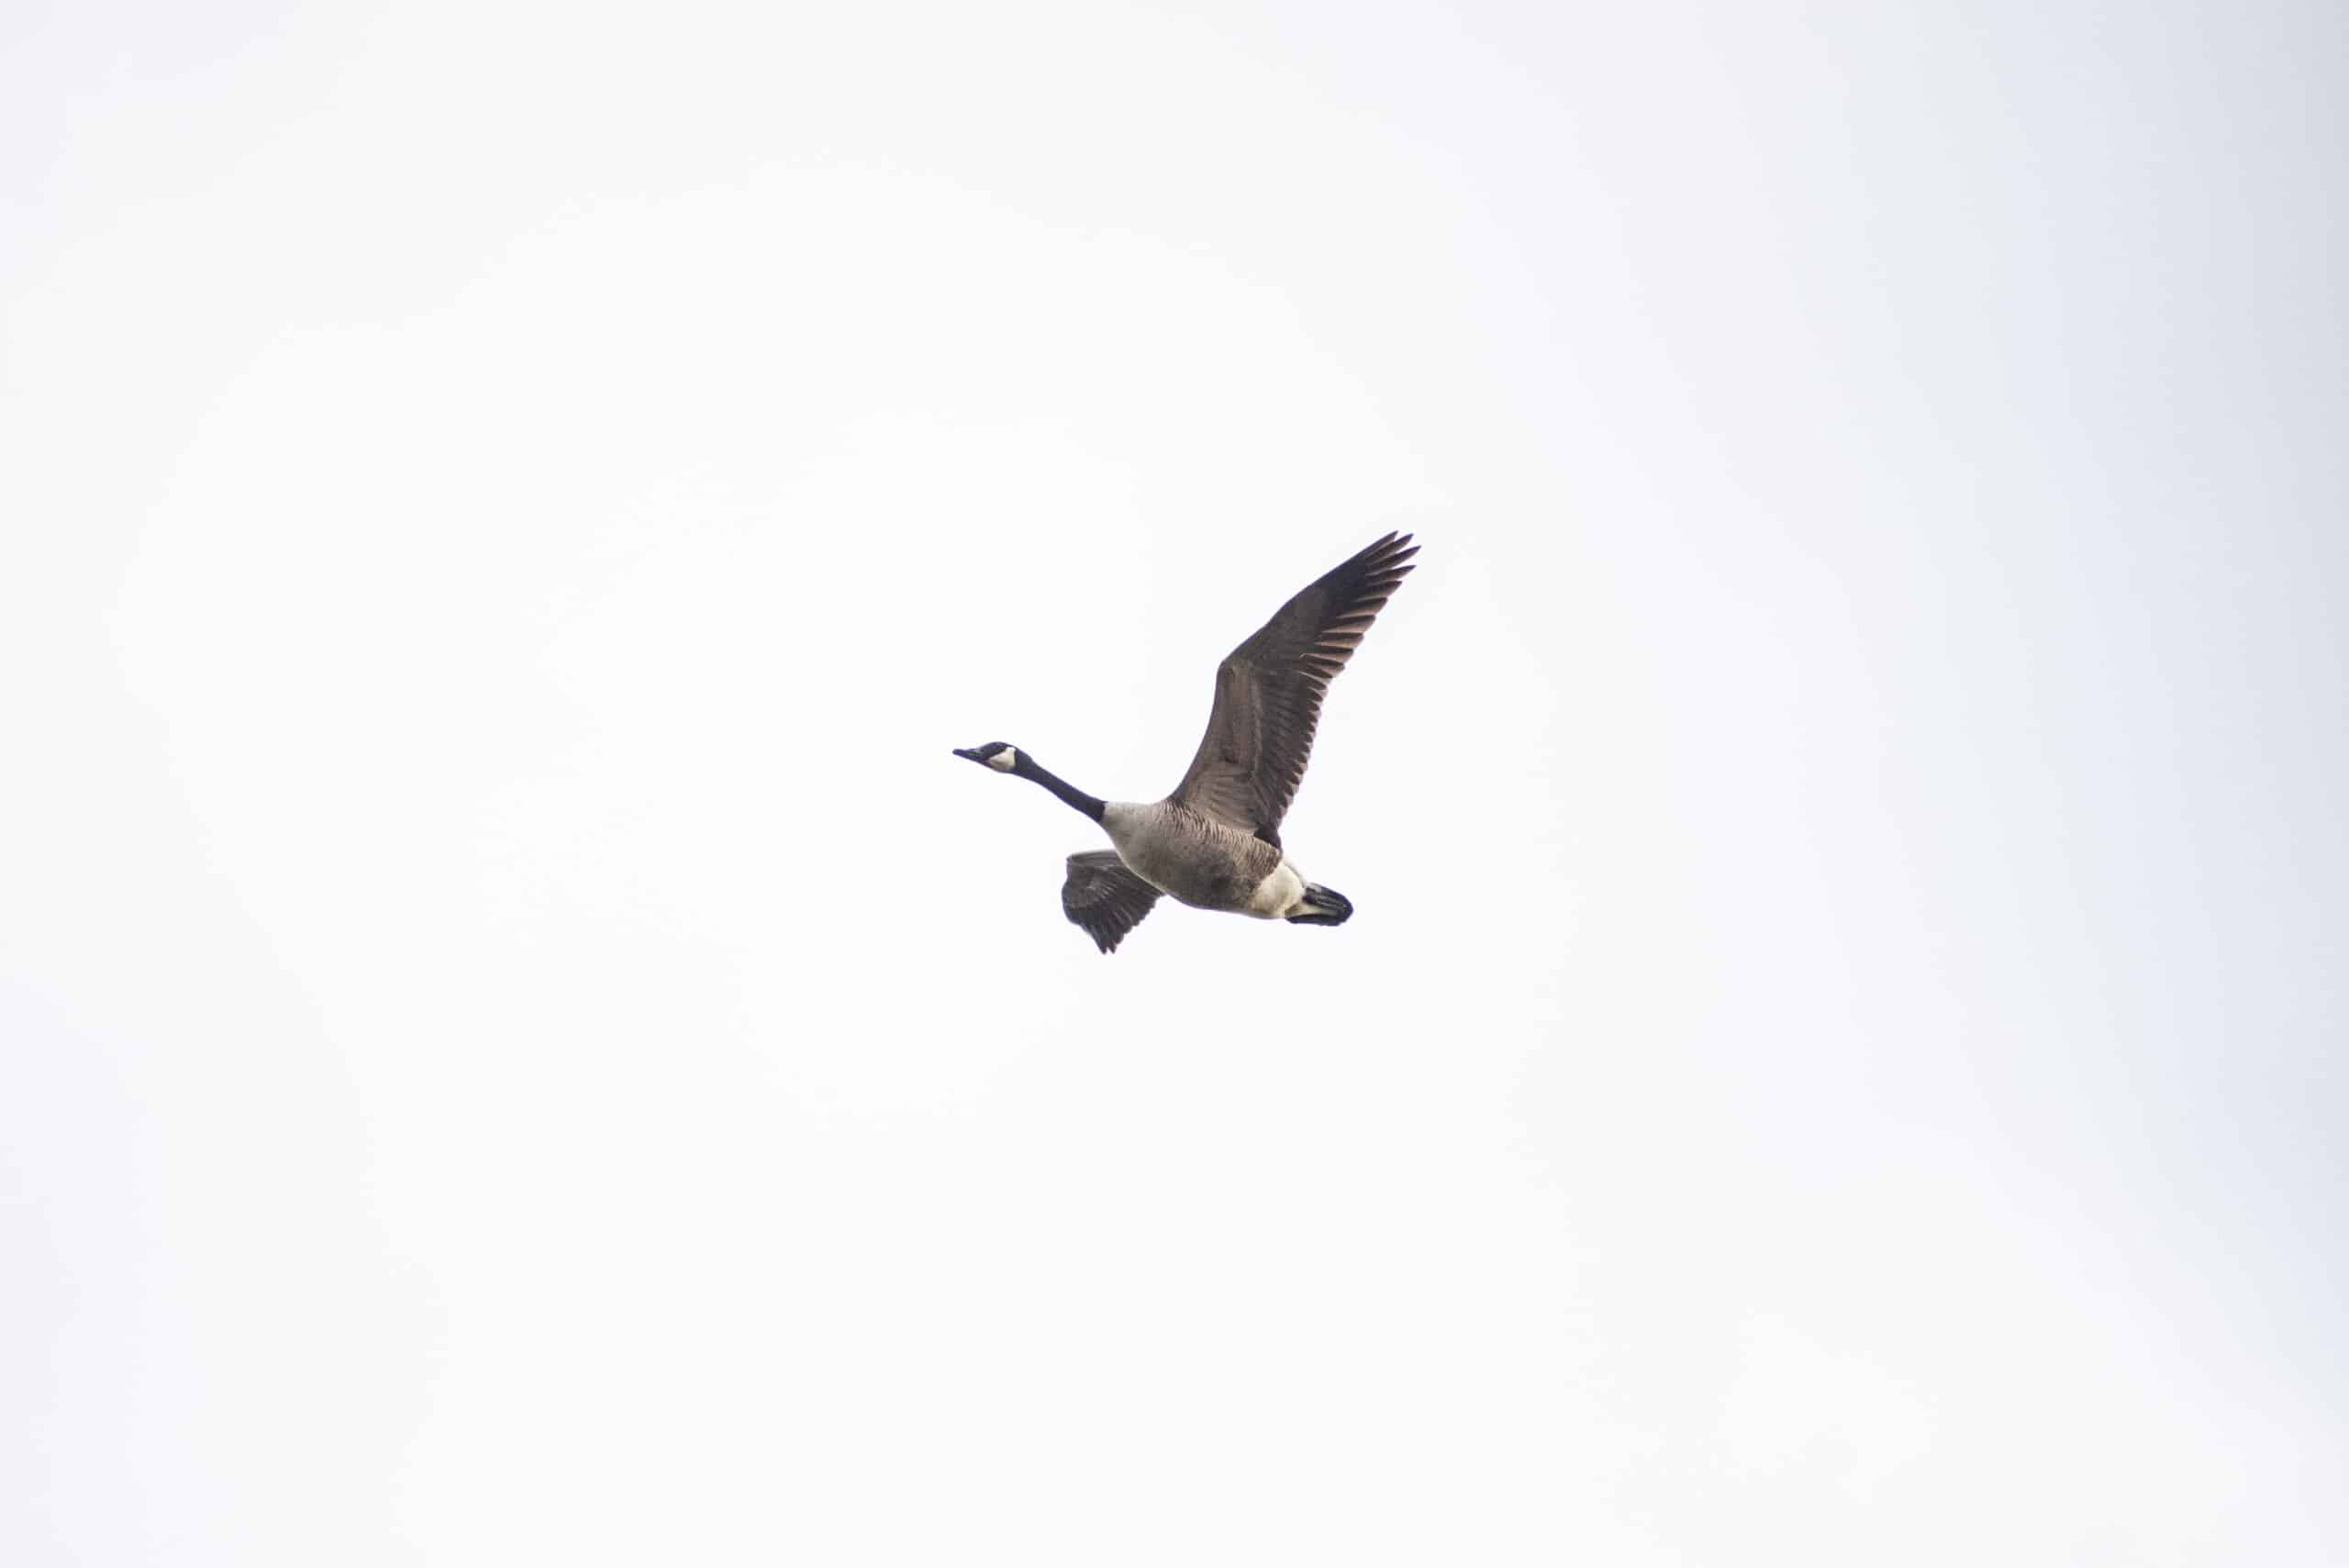 A Canada goose mid flight, against a white, cloudy sky.